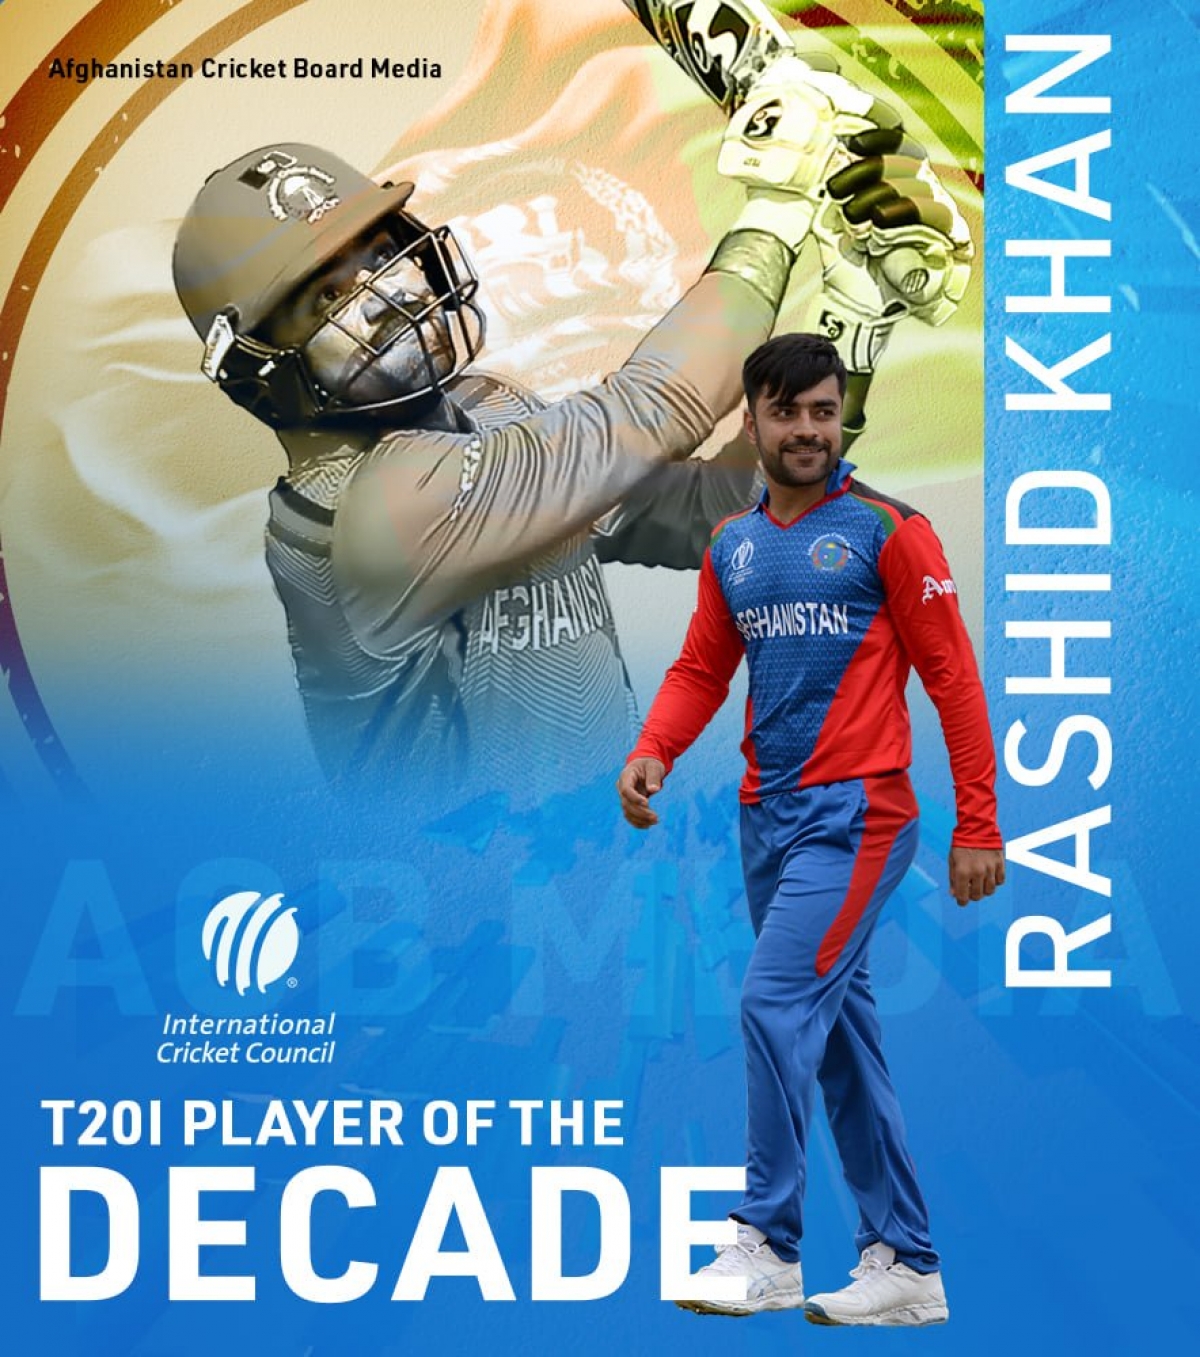 Rashid Khan, Afghanistan Cricket Star, Wins (ICC) Men’s T20I Player of the Decade Title